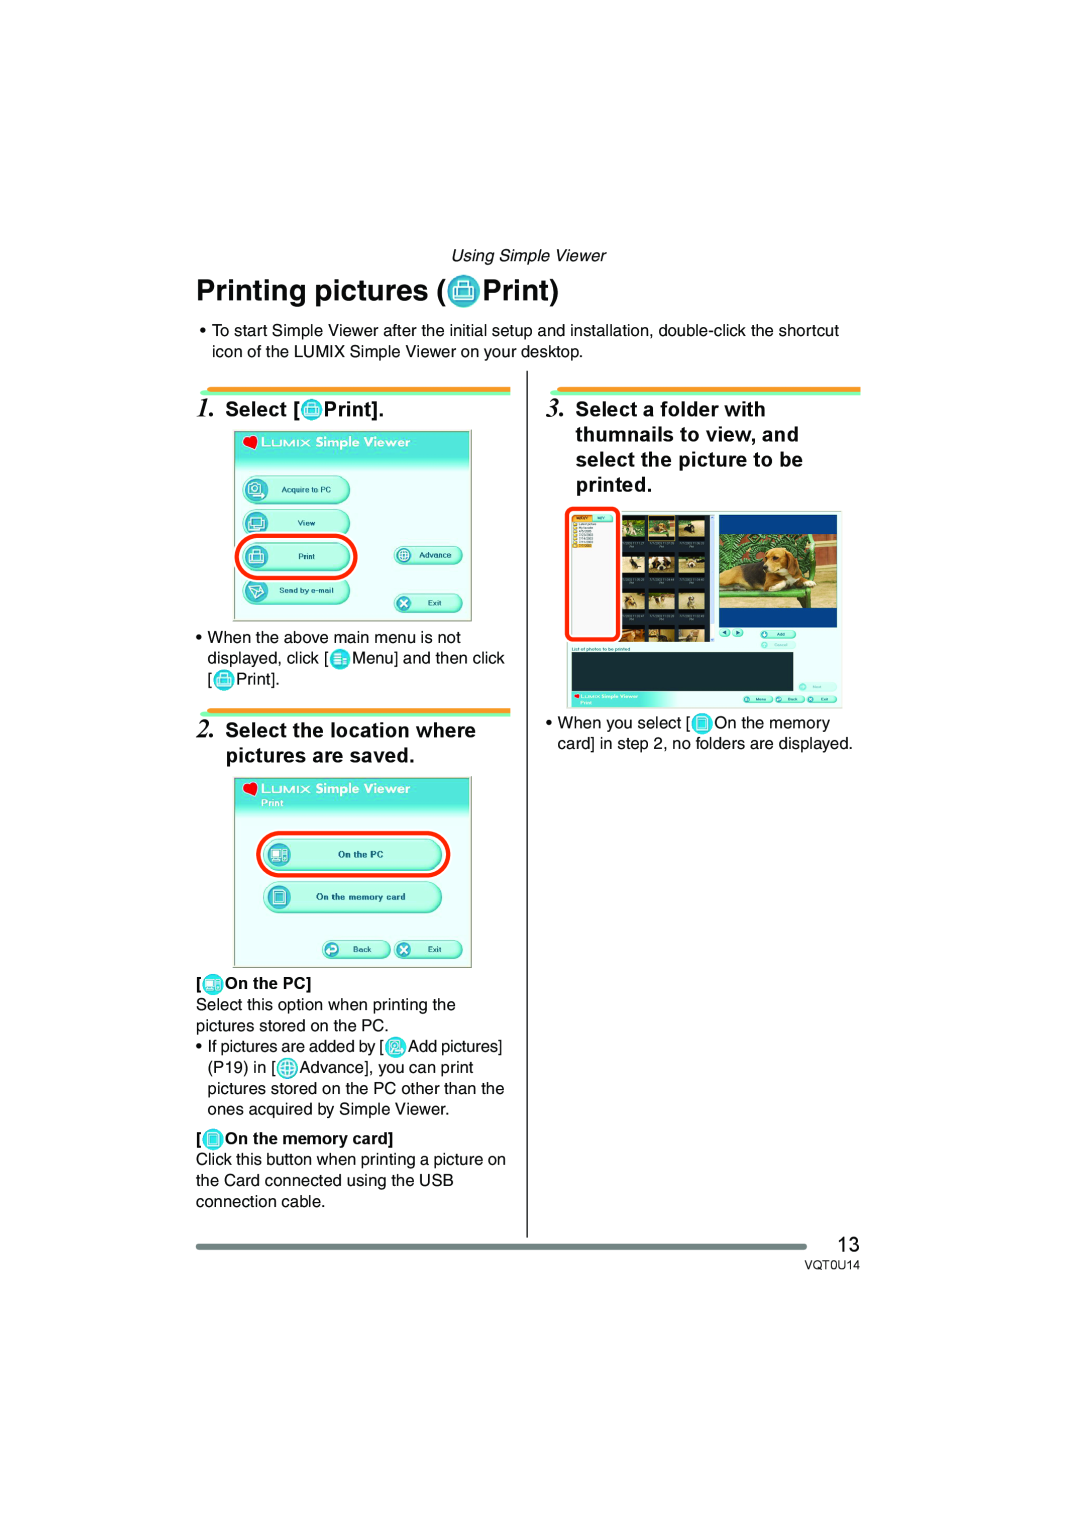 Panasonic VQT0U14 Printing pictures Print, Select Print, Select the location where pictures are saved, On the PC 